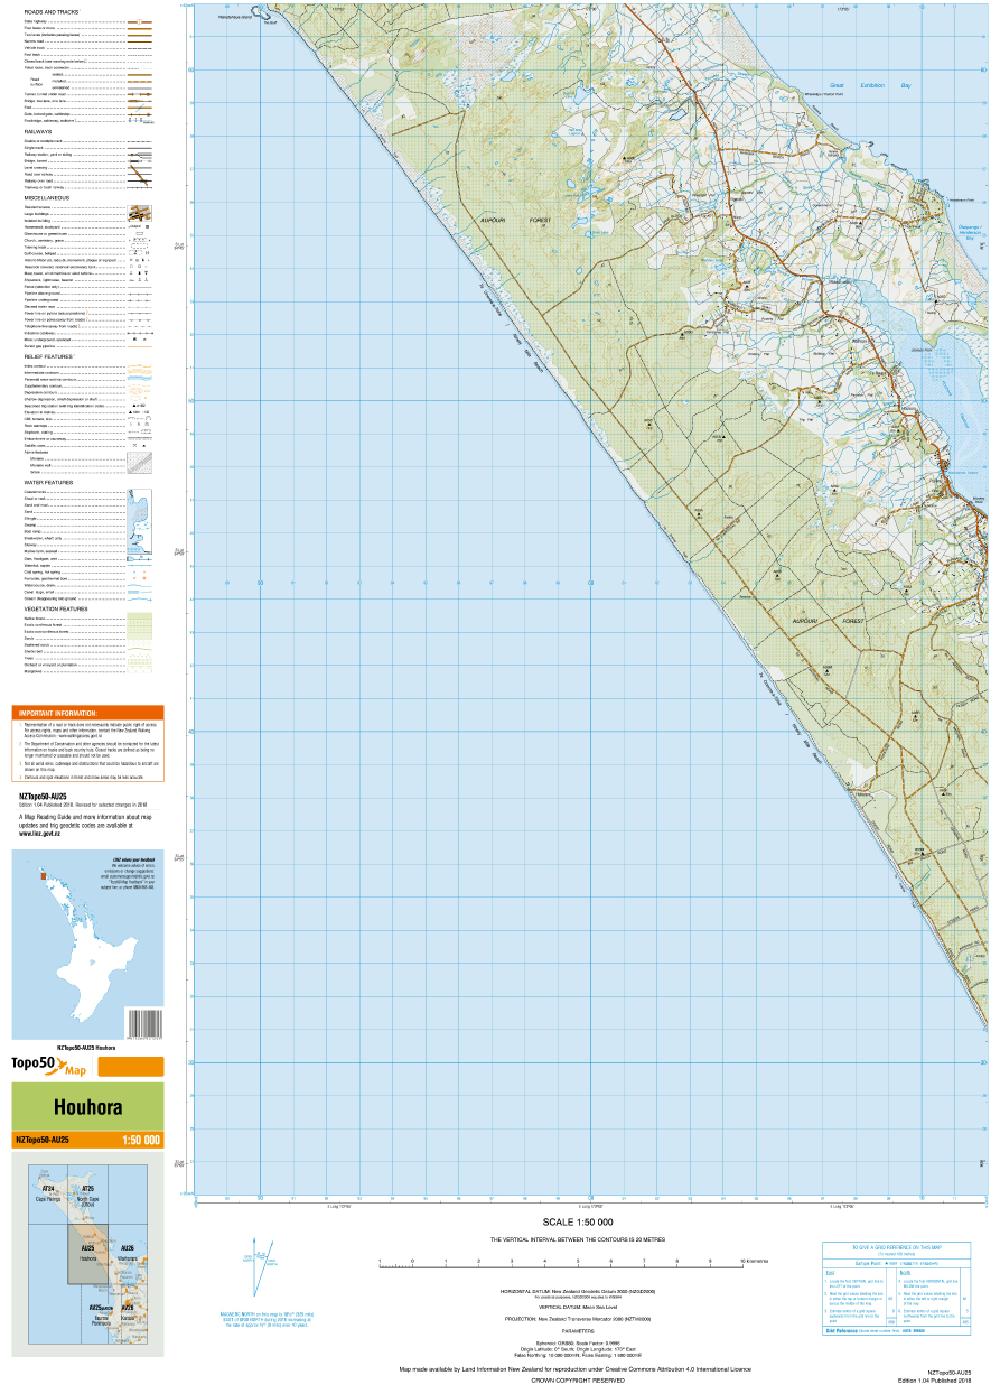 Topo map of Houhora